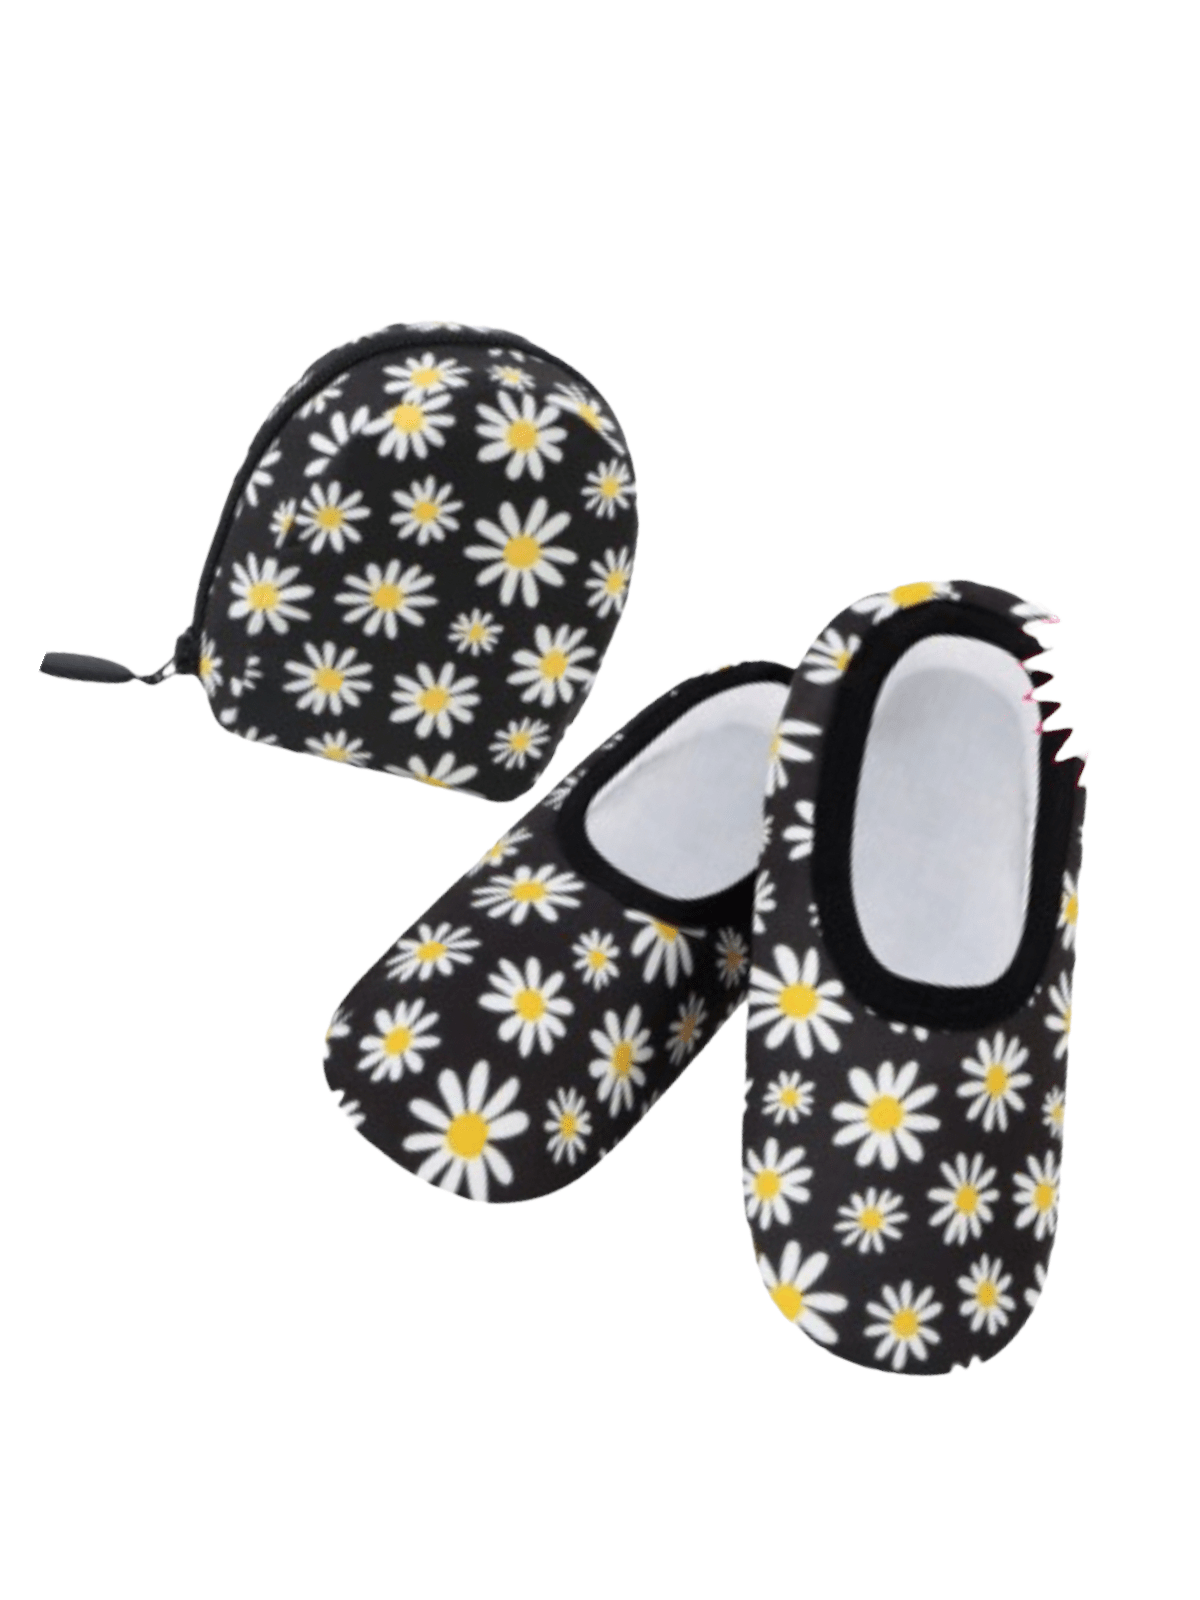 Snoozies Skinnies Travel Pouch Snoozies Slippers Small / B&W Daisy